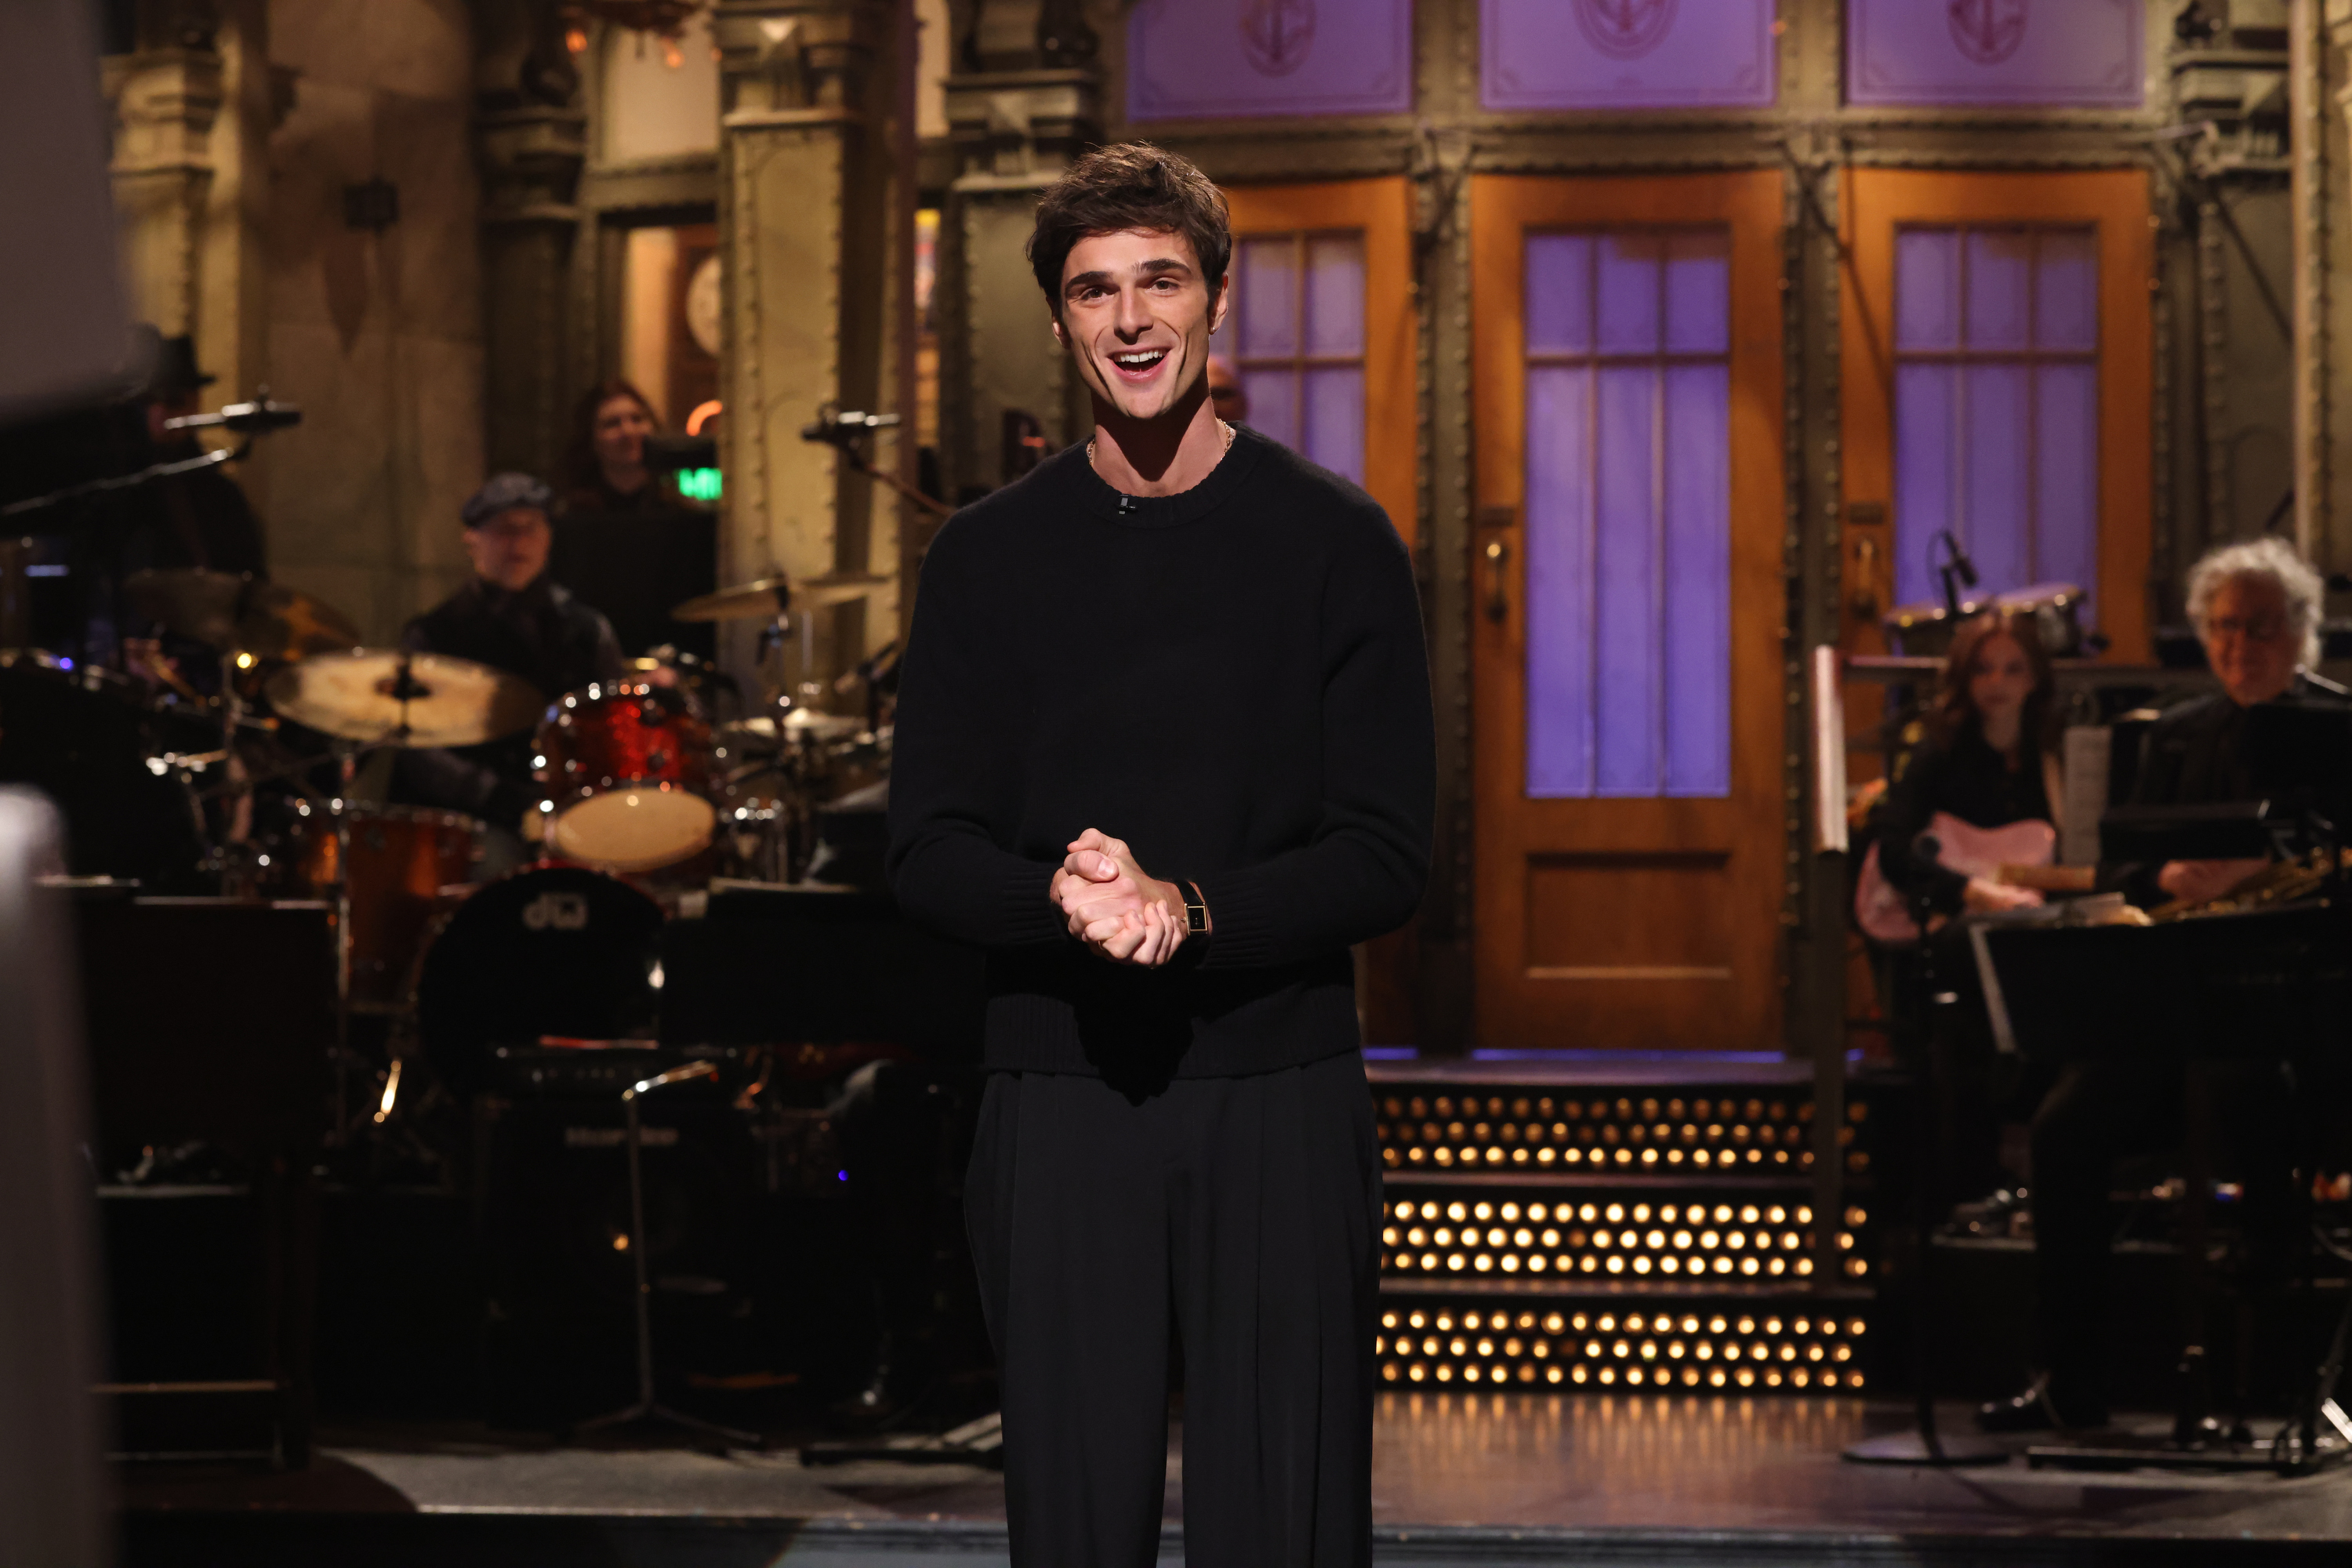 Jacob Elordi stands smiling on a stage with a band in the background during his SNL monologue